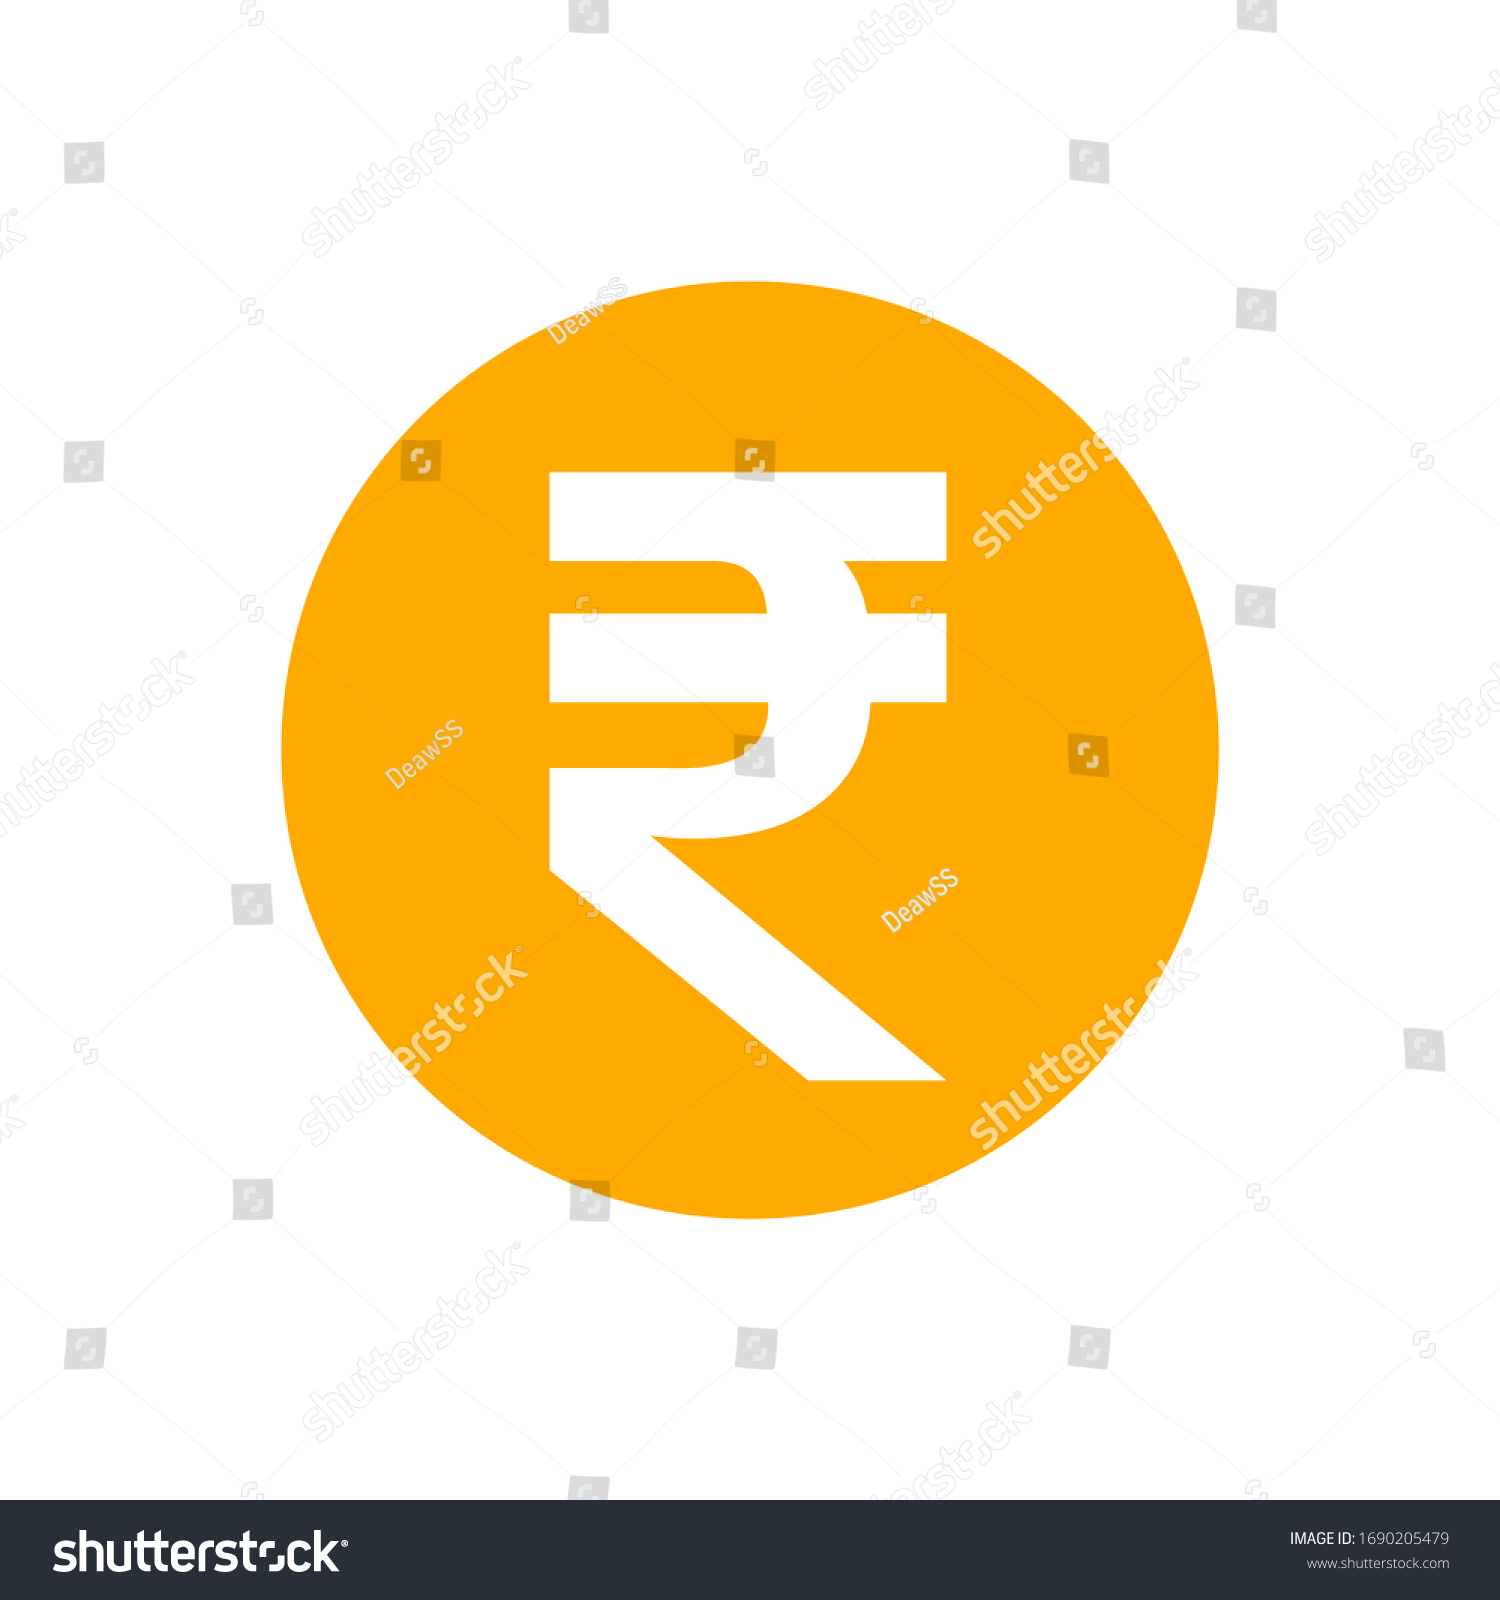 SVG of rupee currency coin orange for icon isolated on white, rupee money for app symbol, simple flat rupee money, currency digital rupee coin for financial concept, vector svg